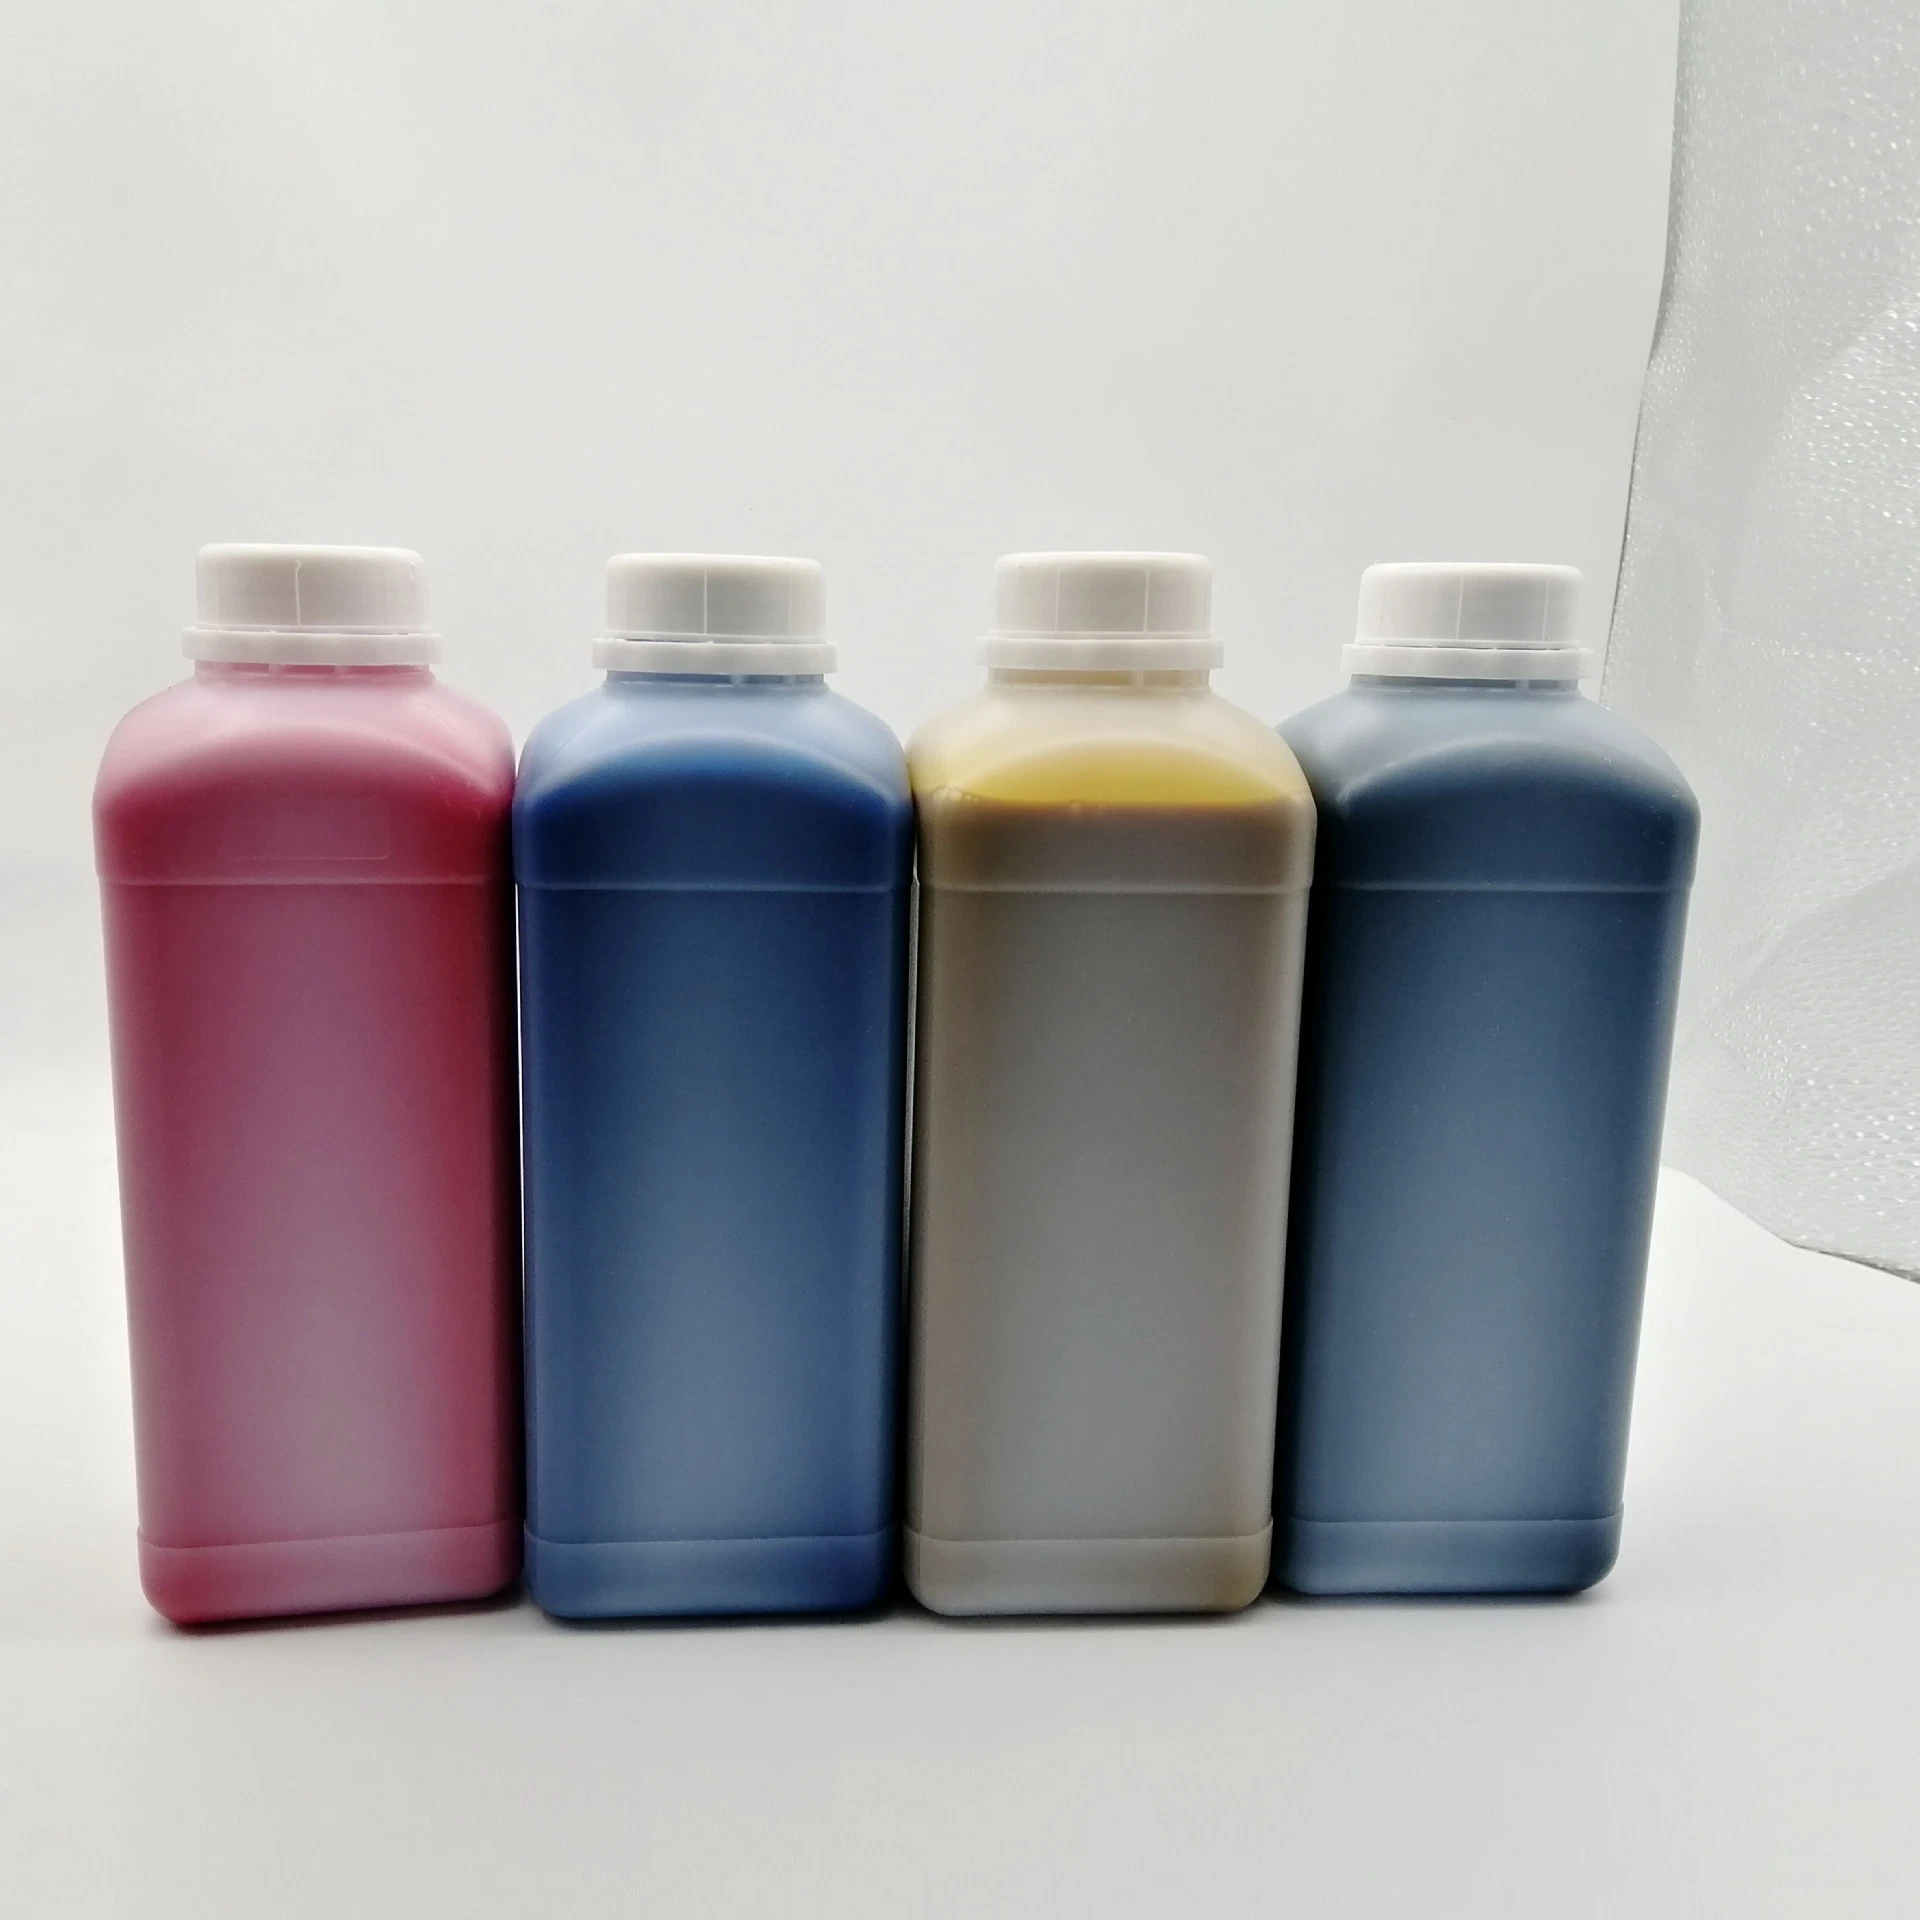 DTG Digital Superior Reliable Textile Cmyk Water Based Pigment Printing Ink with High Fluency for Inkjet T-Shirts Printing